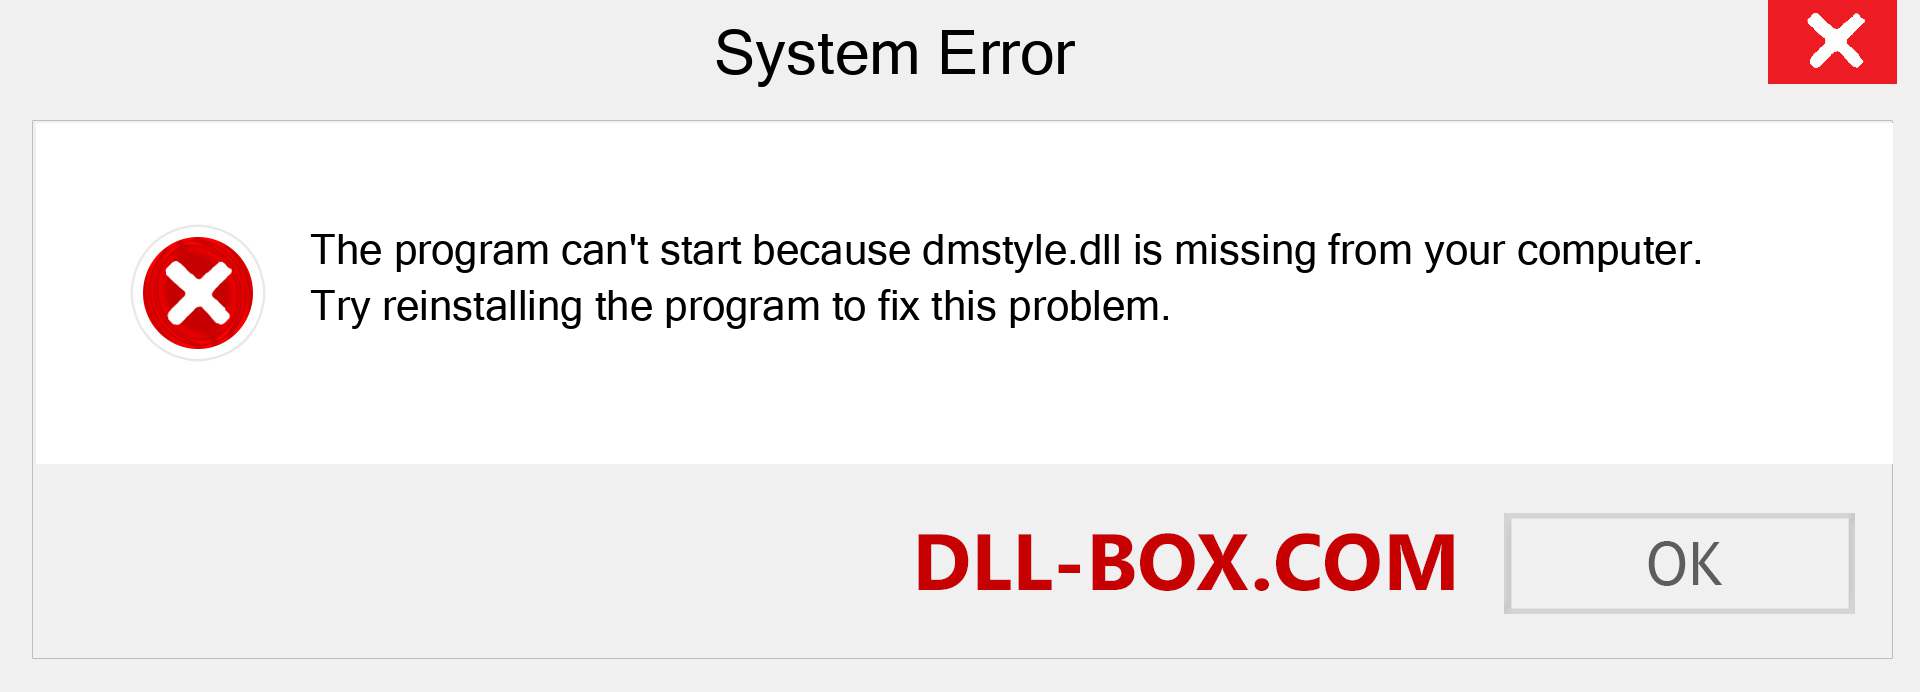  dmstyle.dll file is missing?. Download for Windows 7, 8, 10 - Fix  dmstyle dll Missing Error on Windows, photos, images